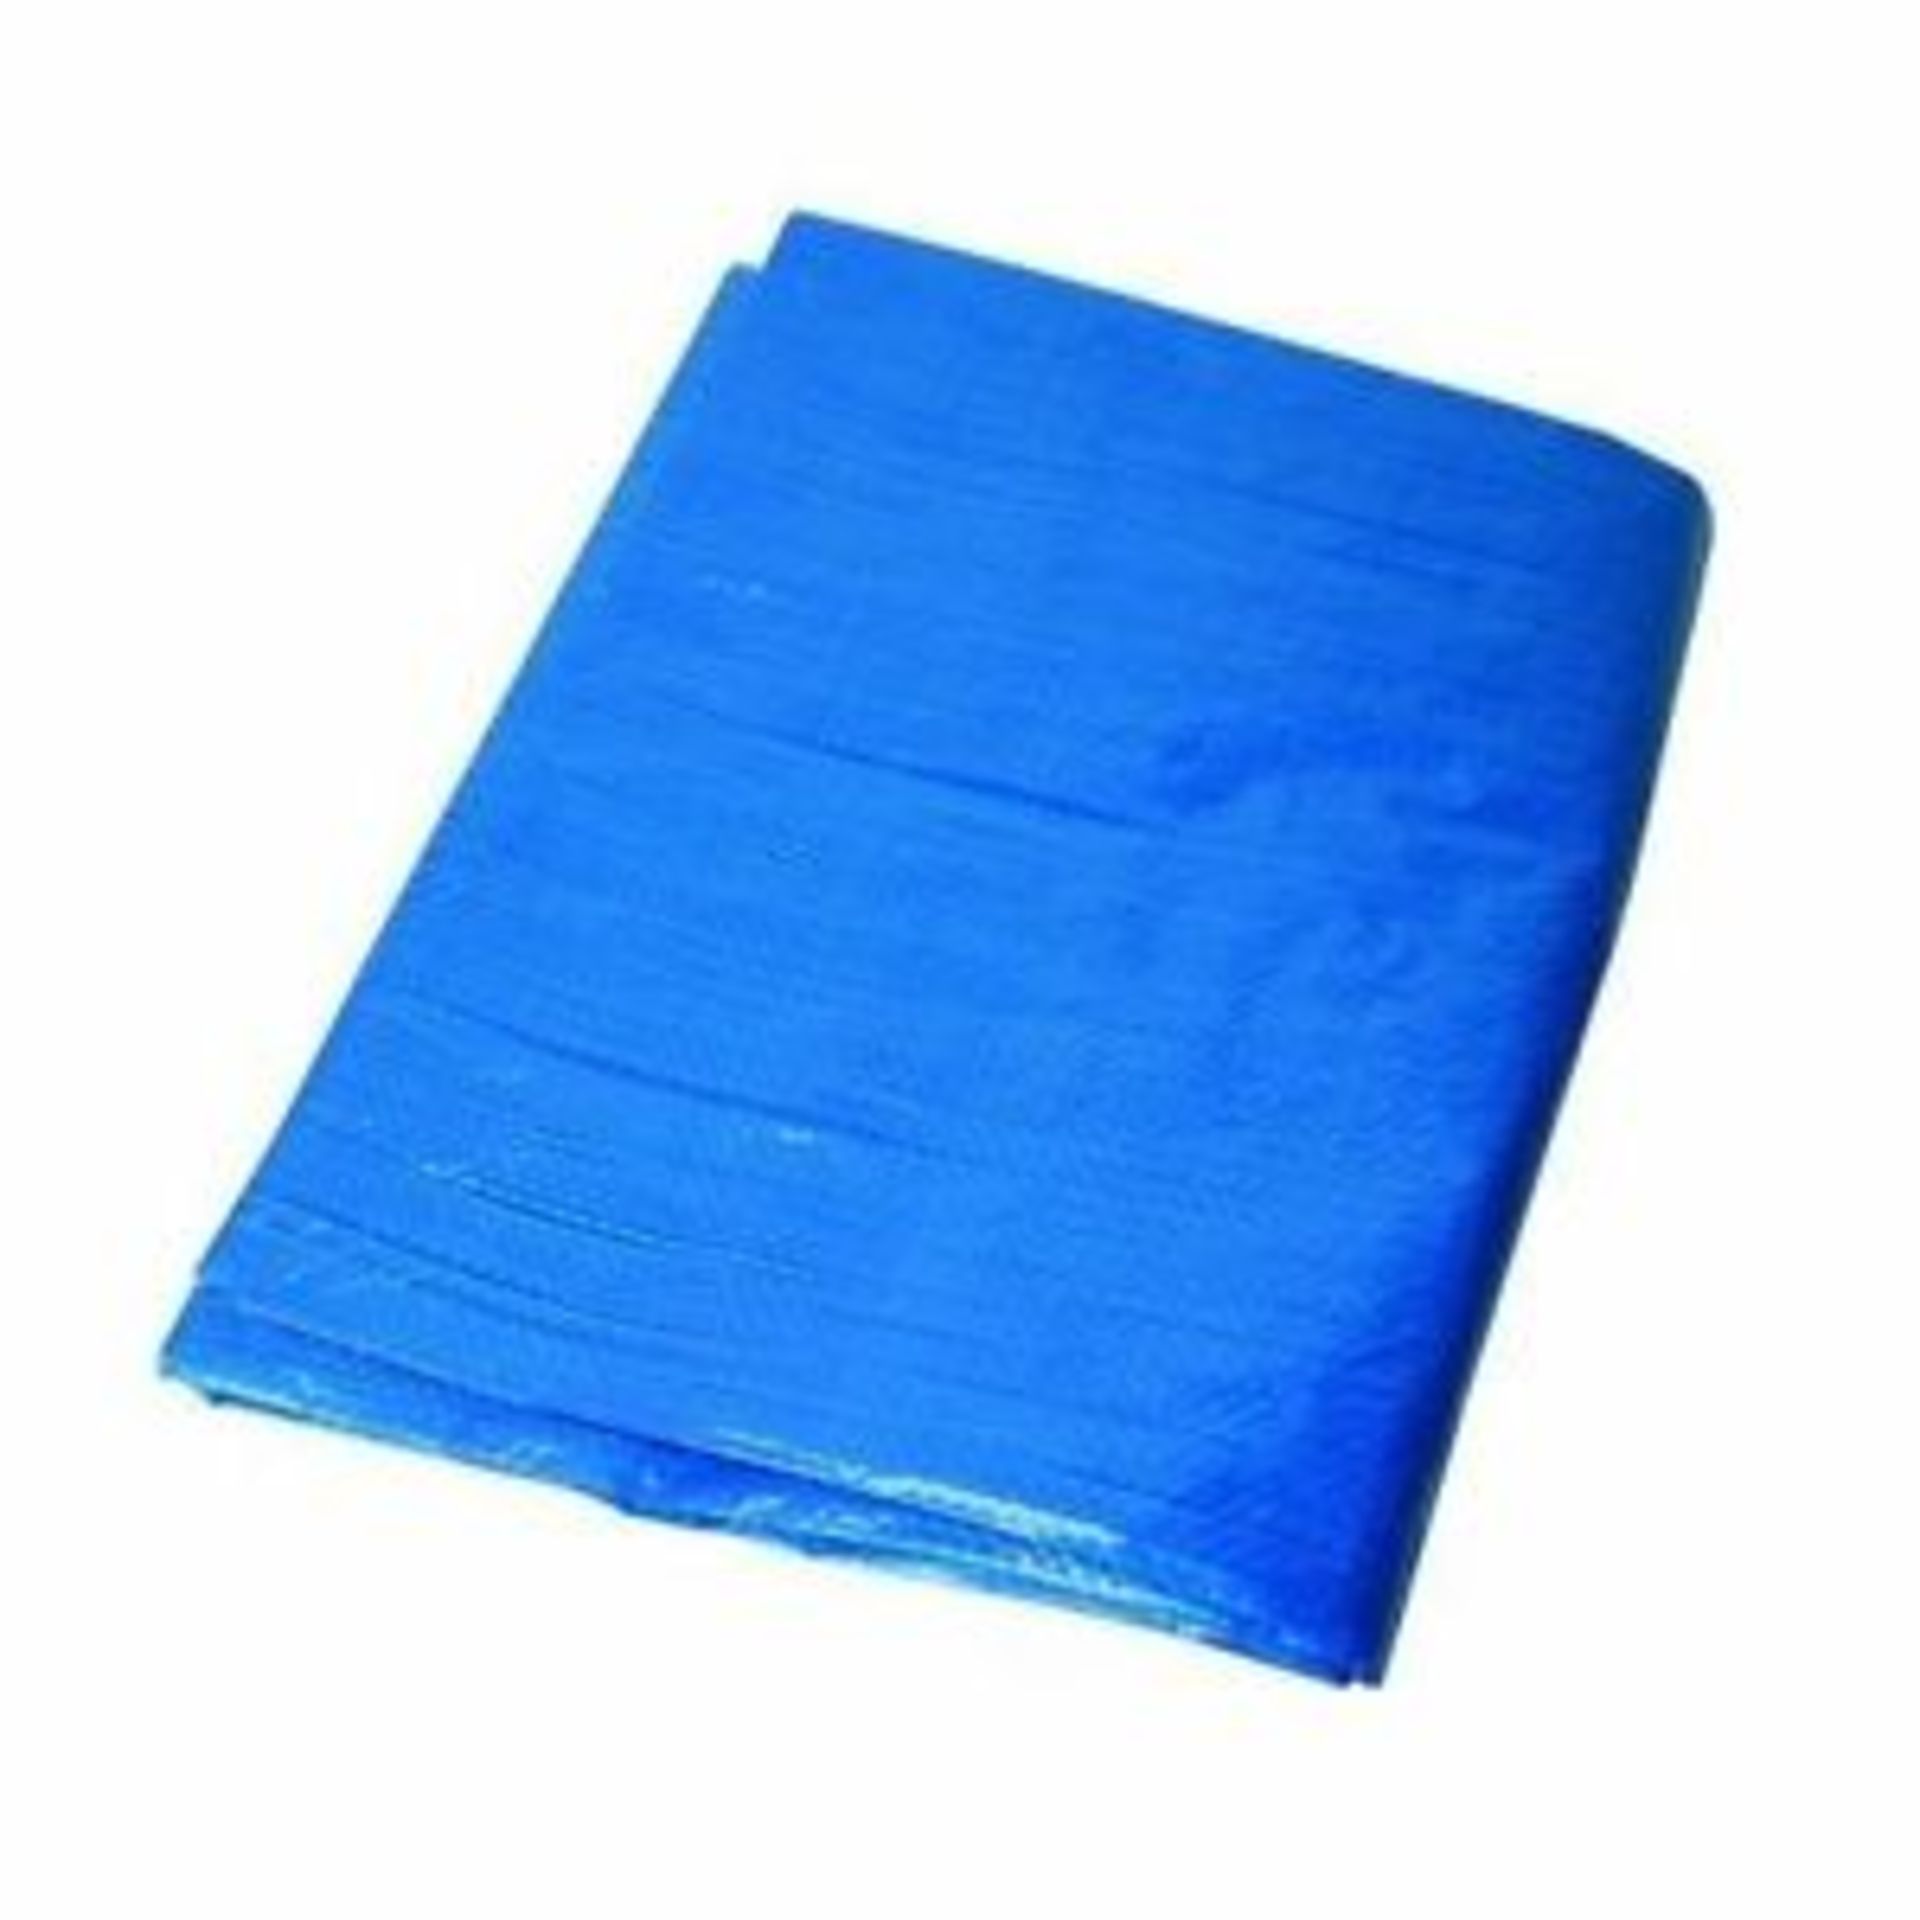 V *TRADE QTY* Brand New 12 x 8ft Blue Tarpaulin X 3 YOUR BID PRICE TO BE MULTIPLIED BY THREE